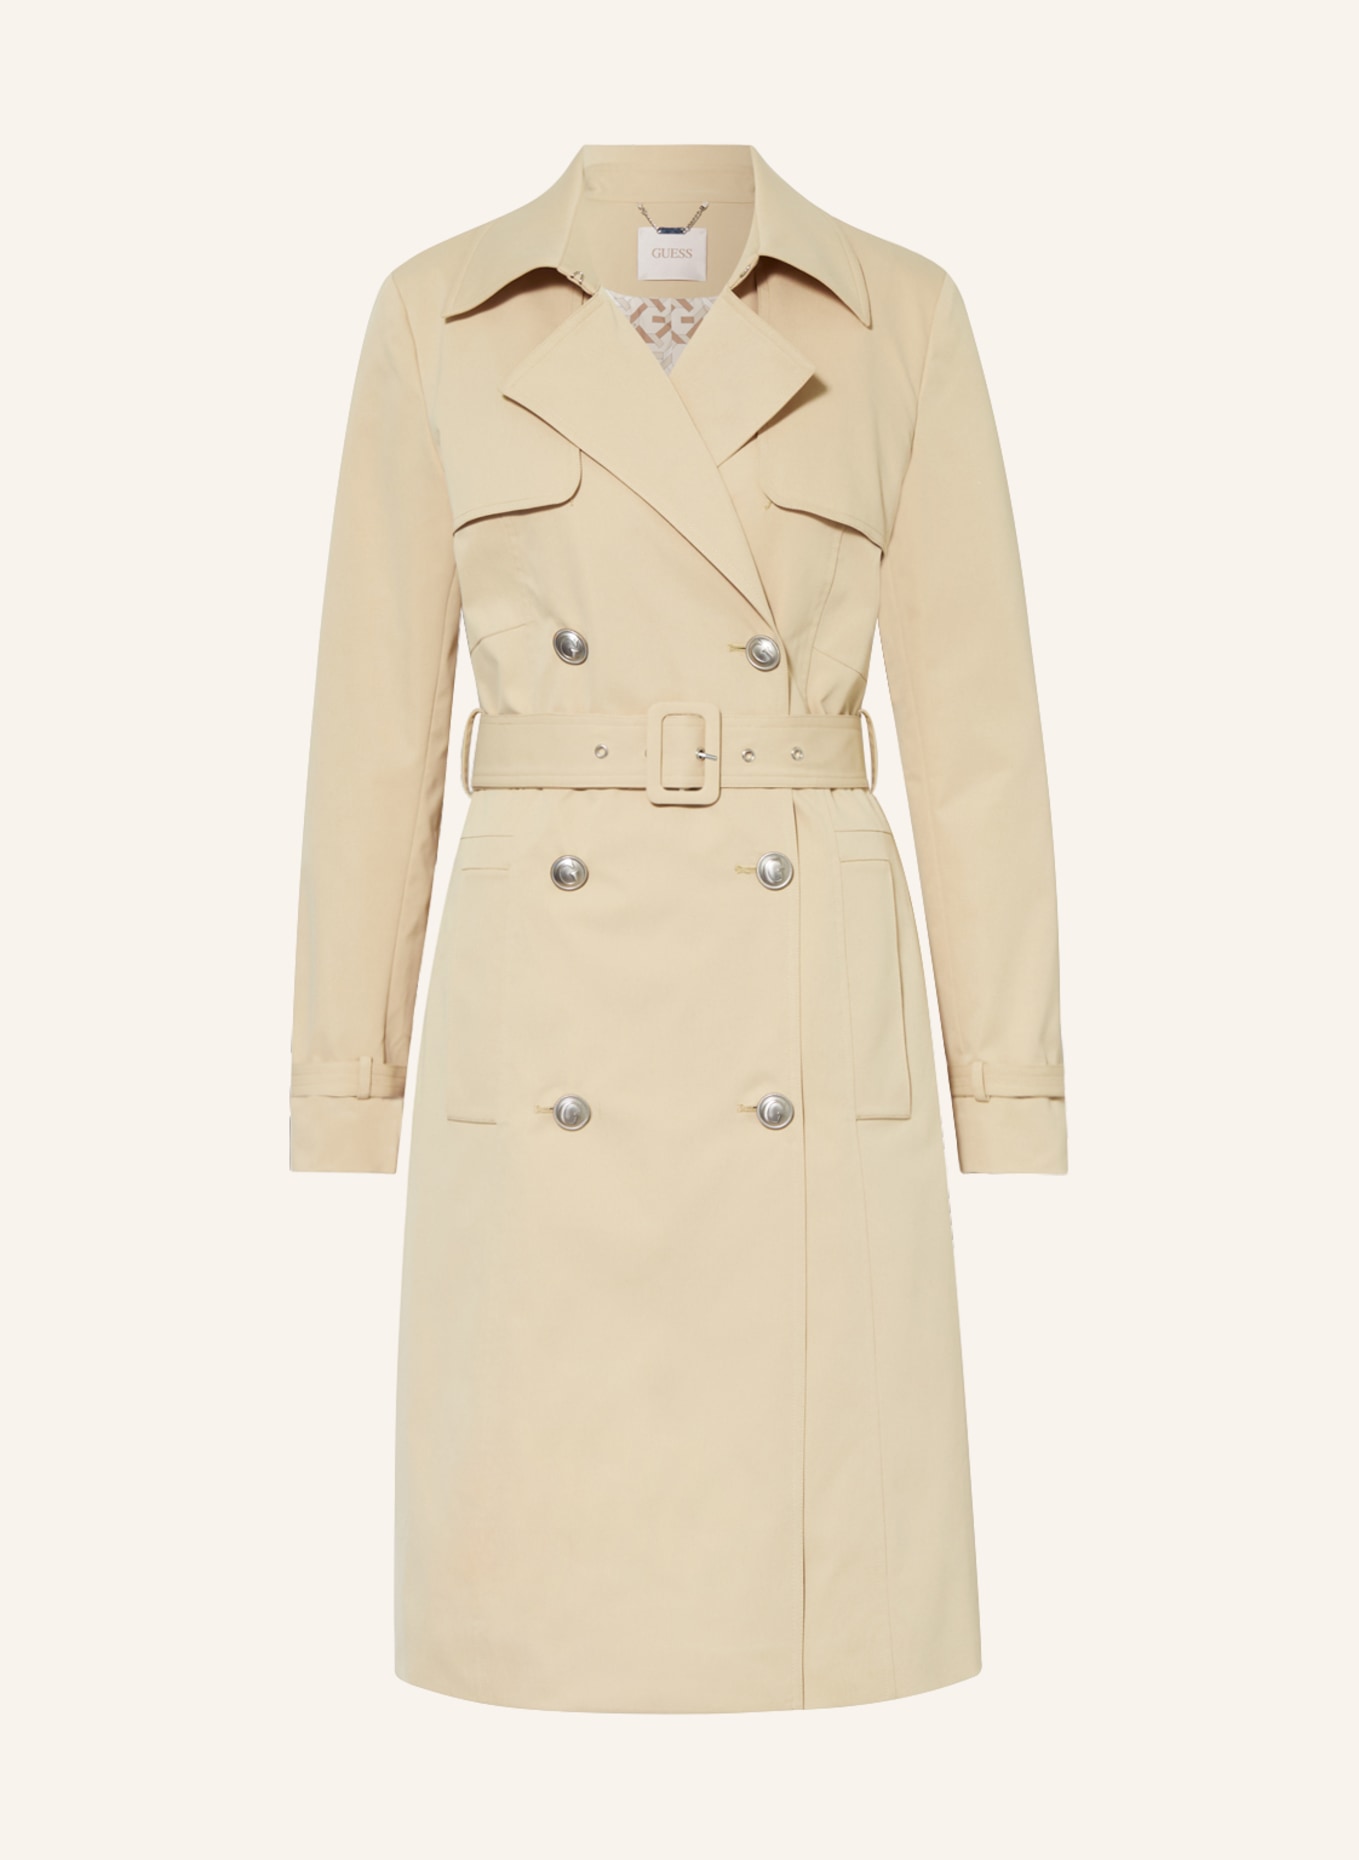 GUESS Trenchcoat ASIA, Farbe: BEIGE (Bild 1)